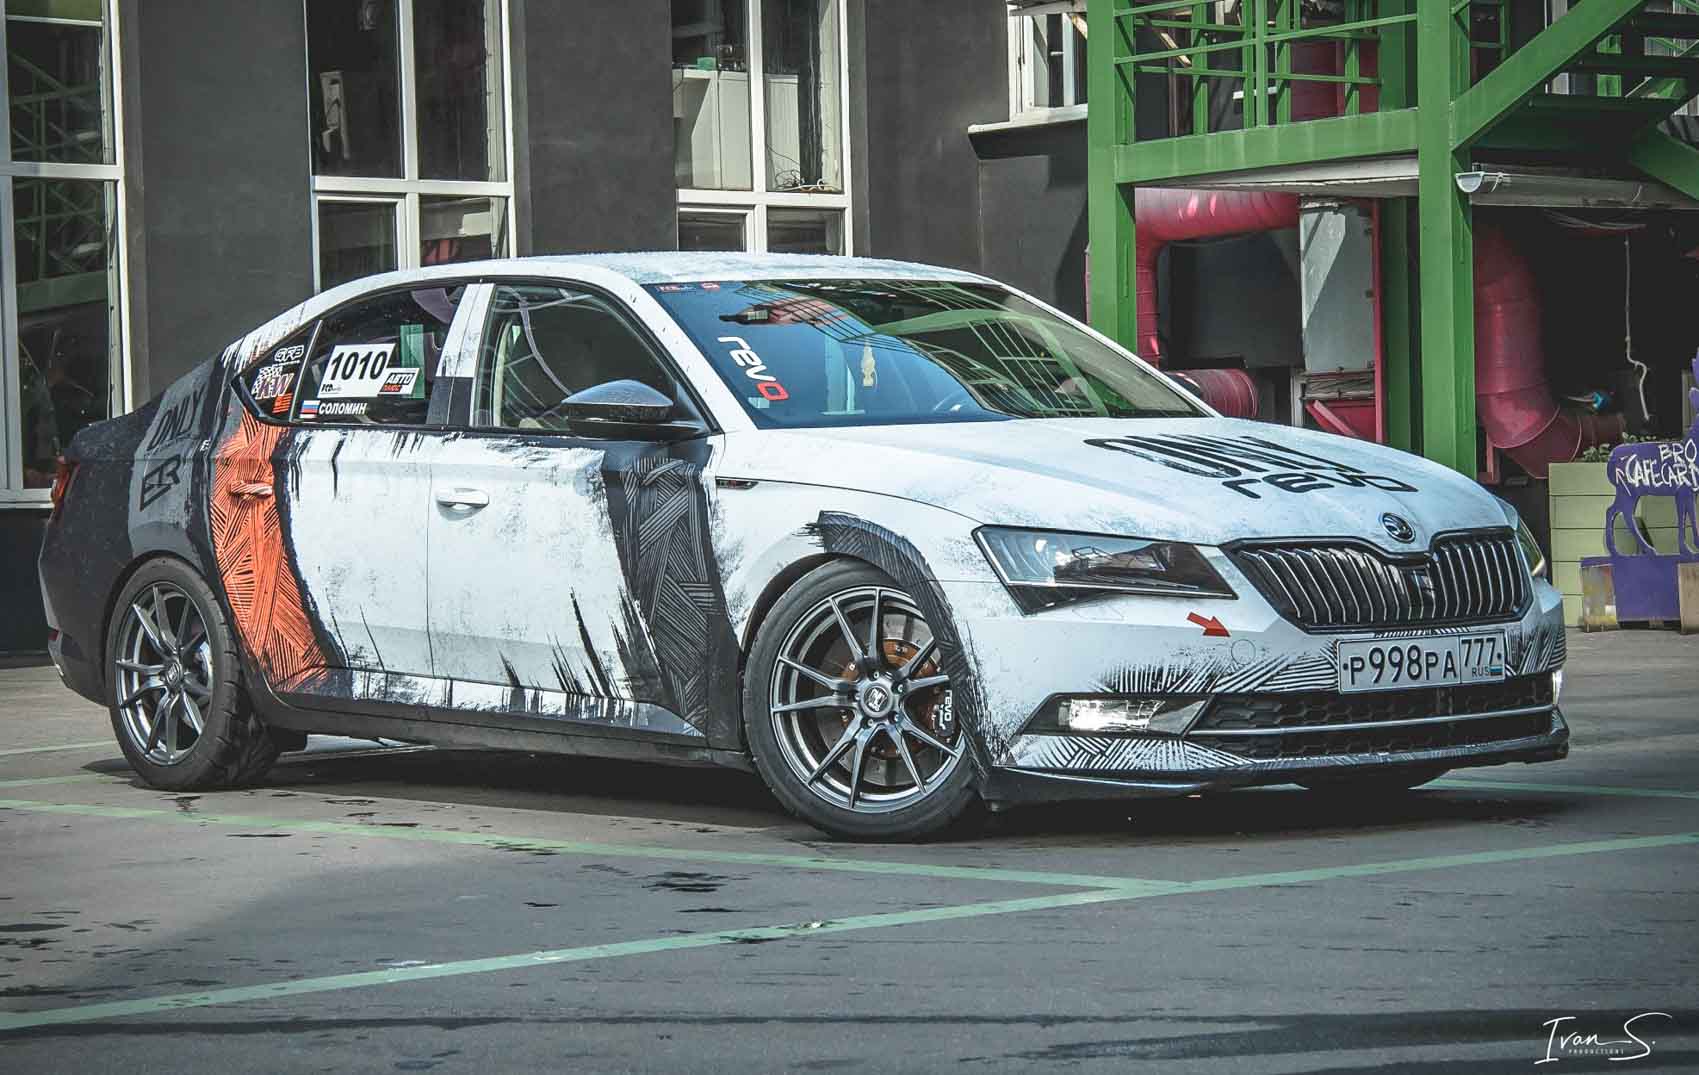 This modified Skoda Octavia can do 0-100 km/h in 3 seconds